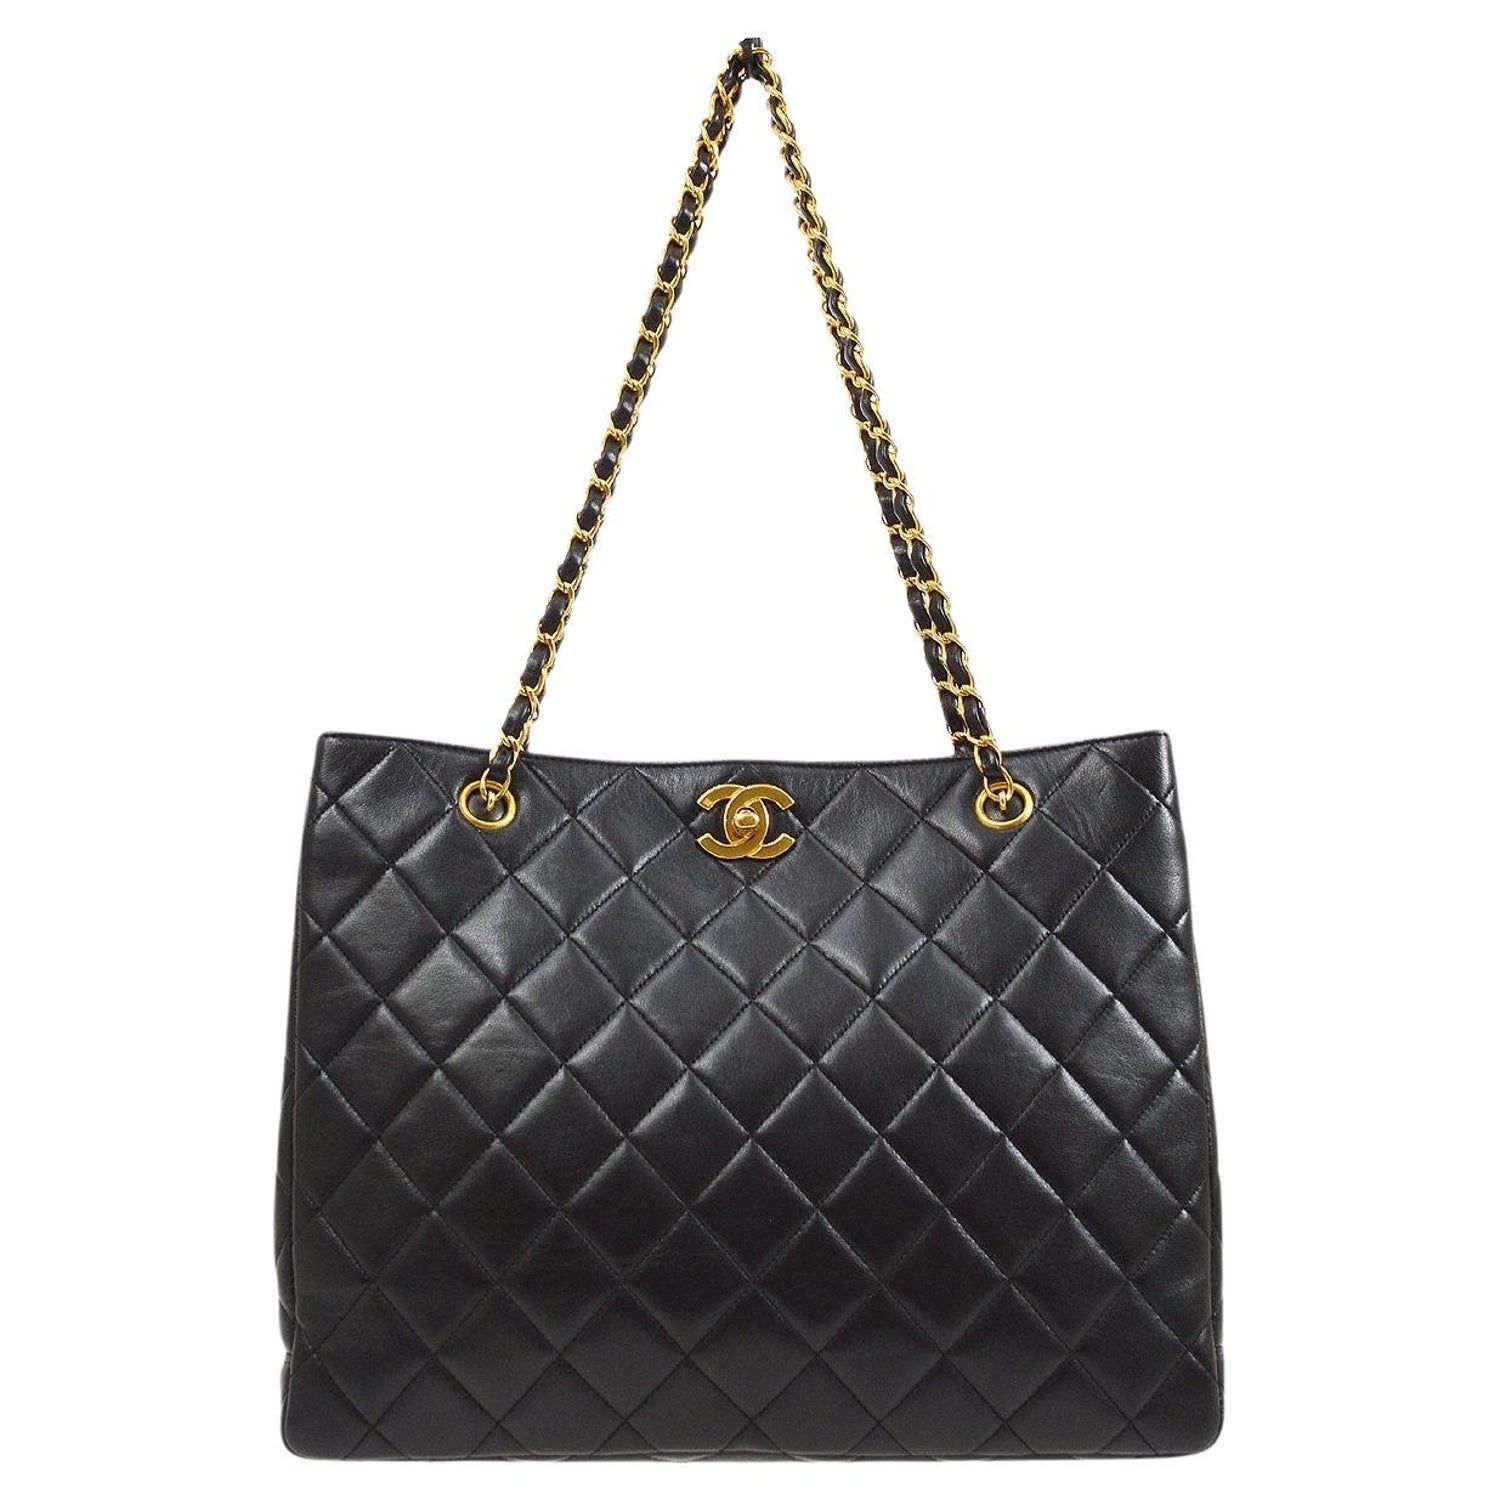 CHANEL CC Black Lambskin Quilted Gold e Evening Carryall Shoulder